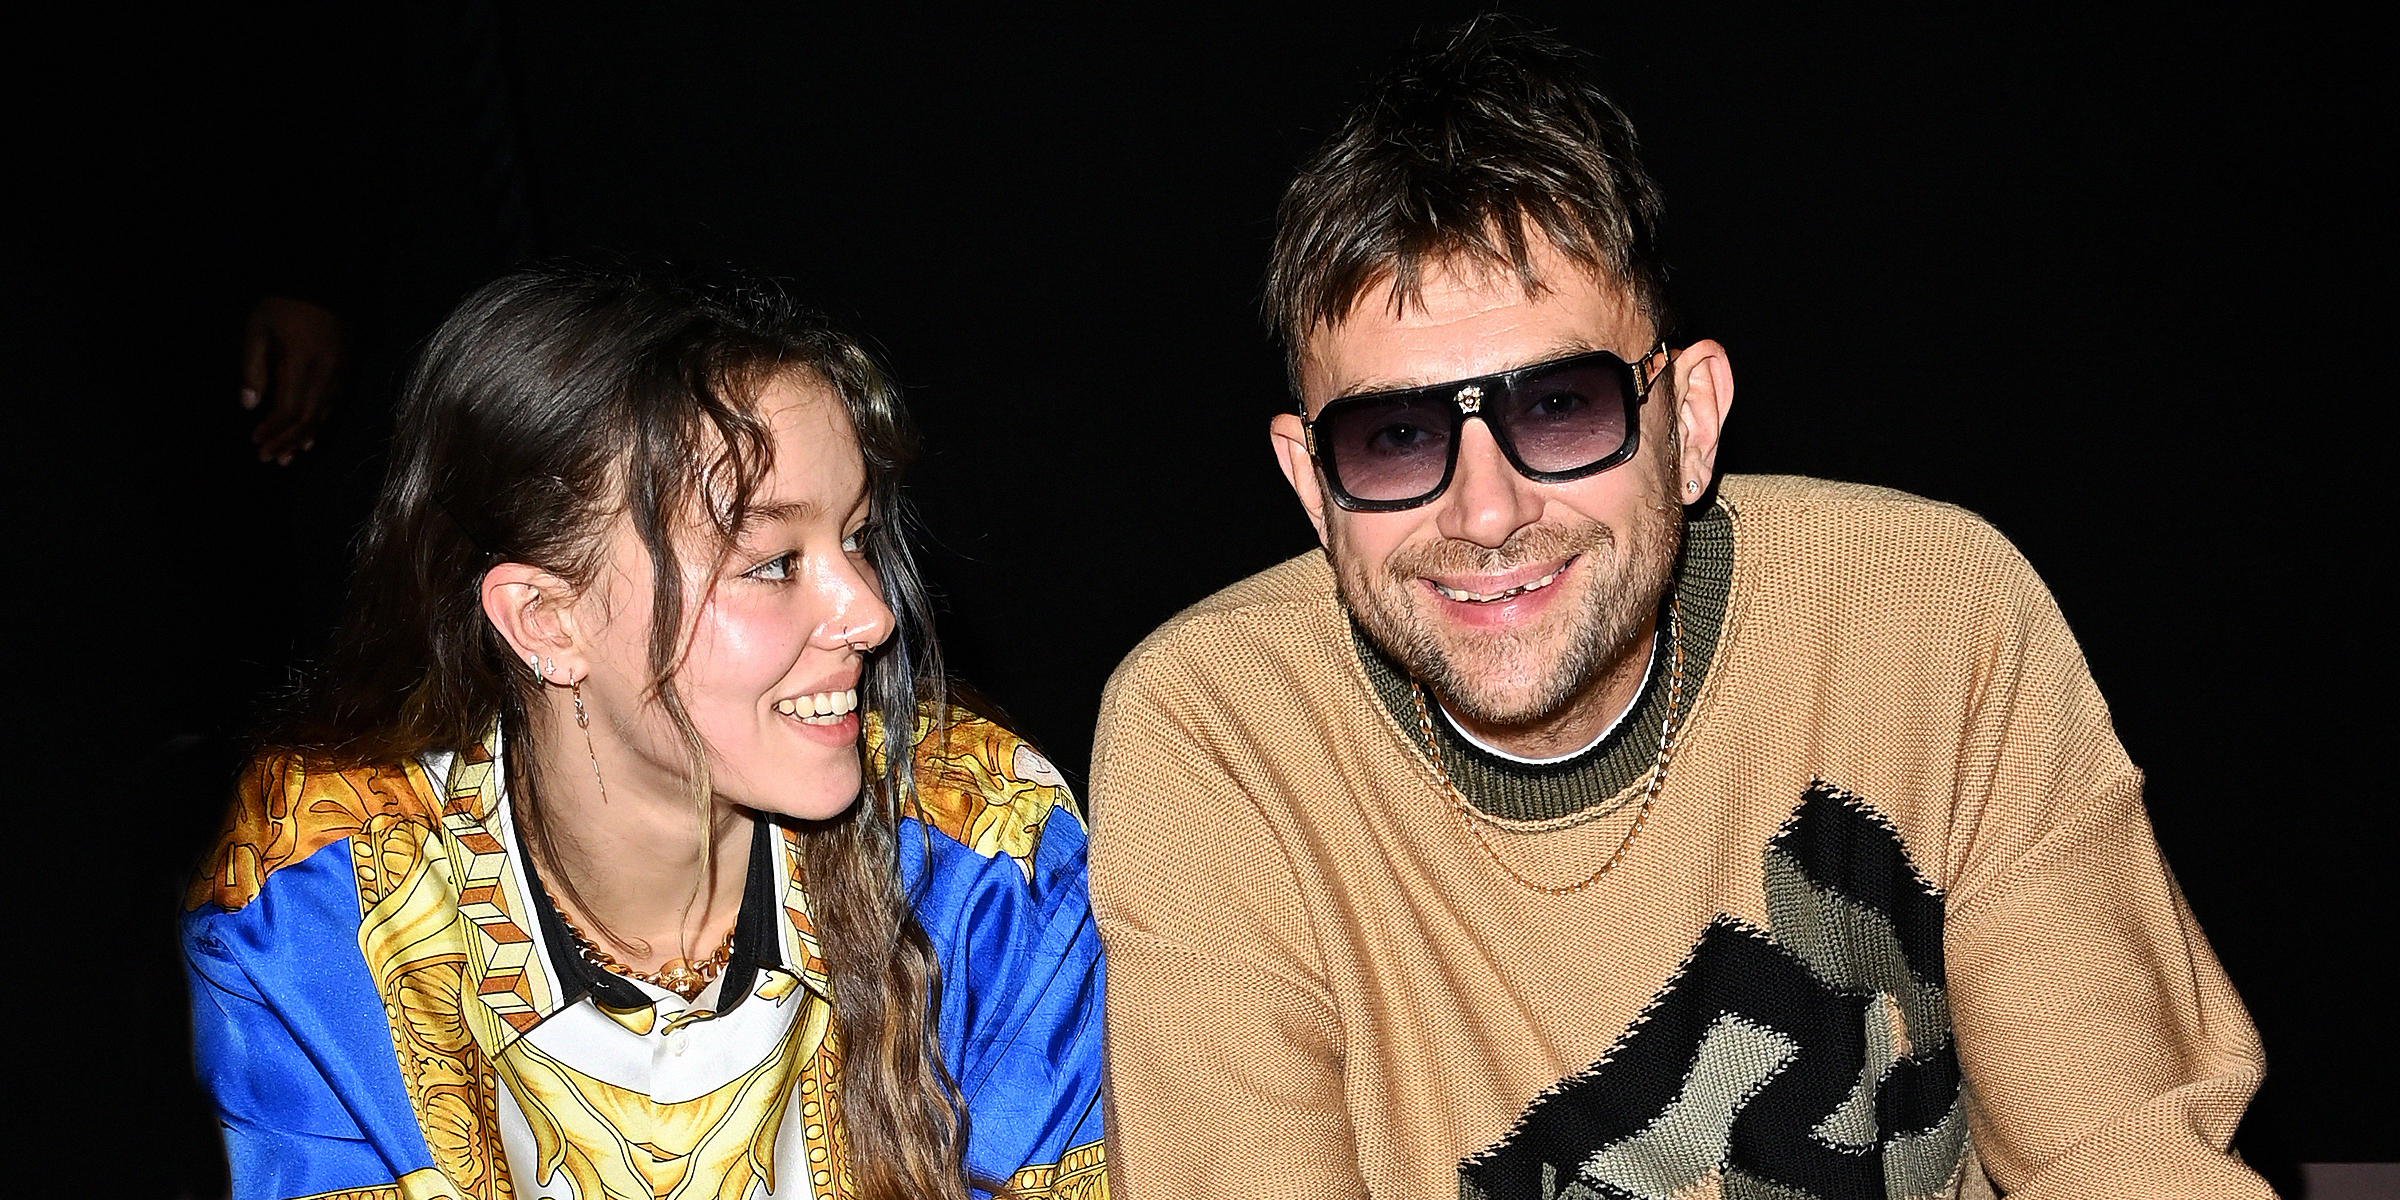 Damon Albarn and His Daughter Missy | Source: Getty Images